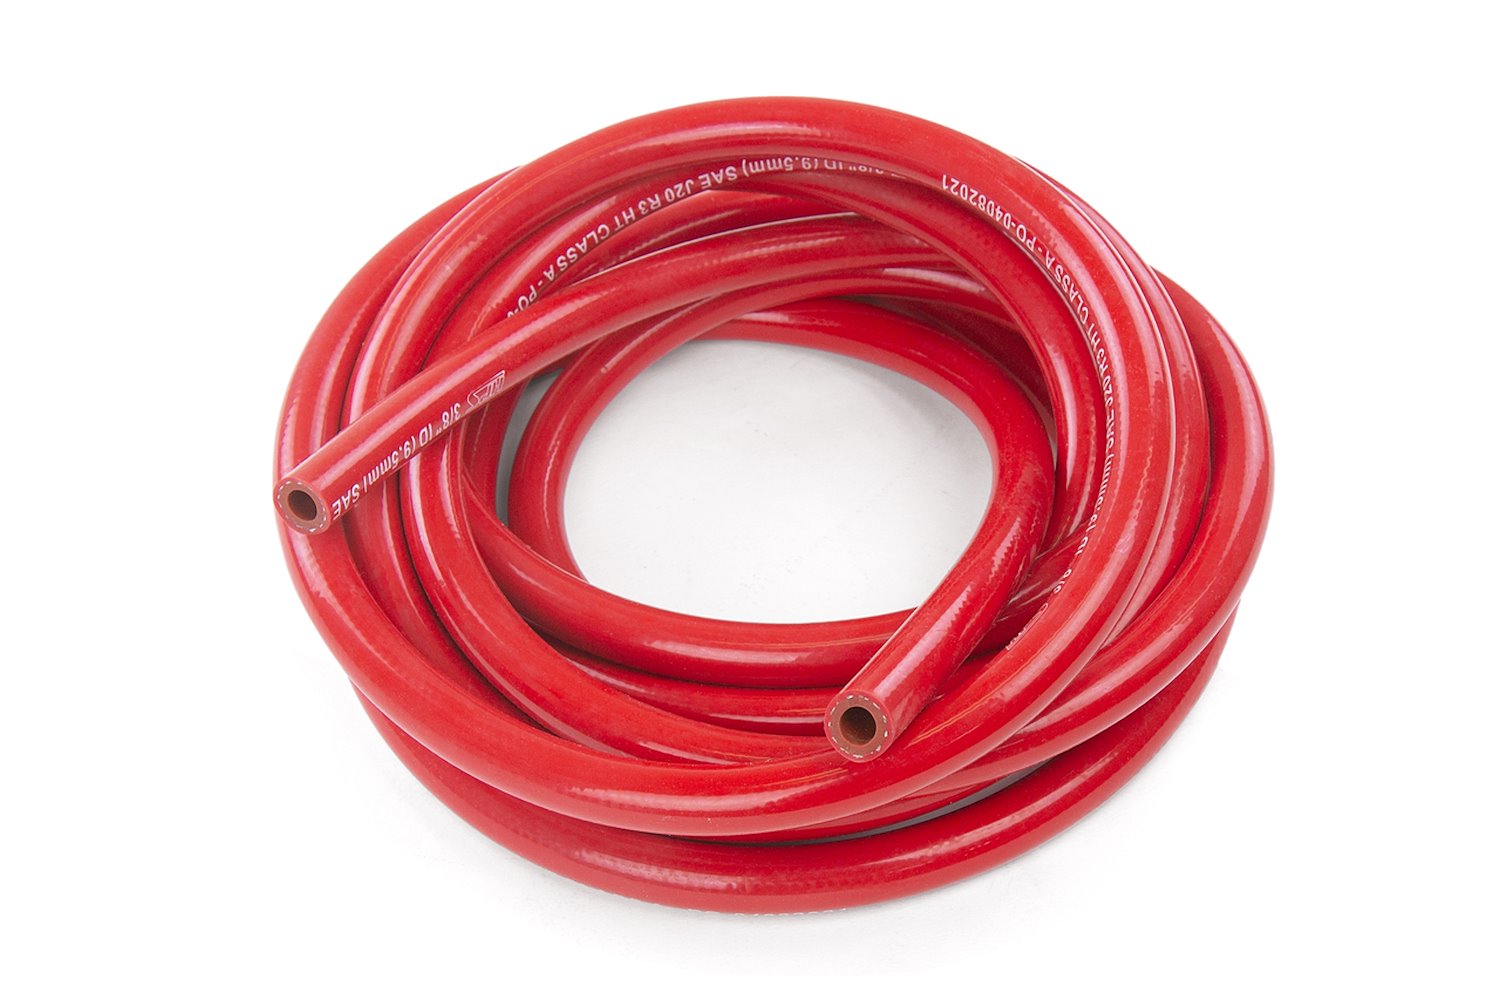 HTHH-100-REDx25 Silicone Heater Hose Tubing, High-Temp 1-Ply Reinforced, 1 in. ID, 25 ft. Roll, Red